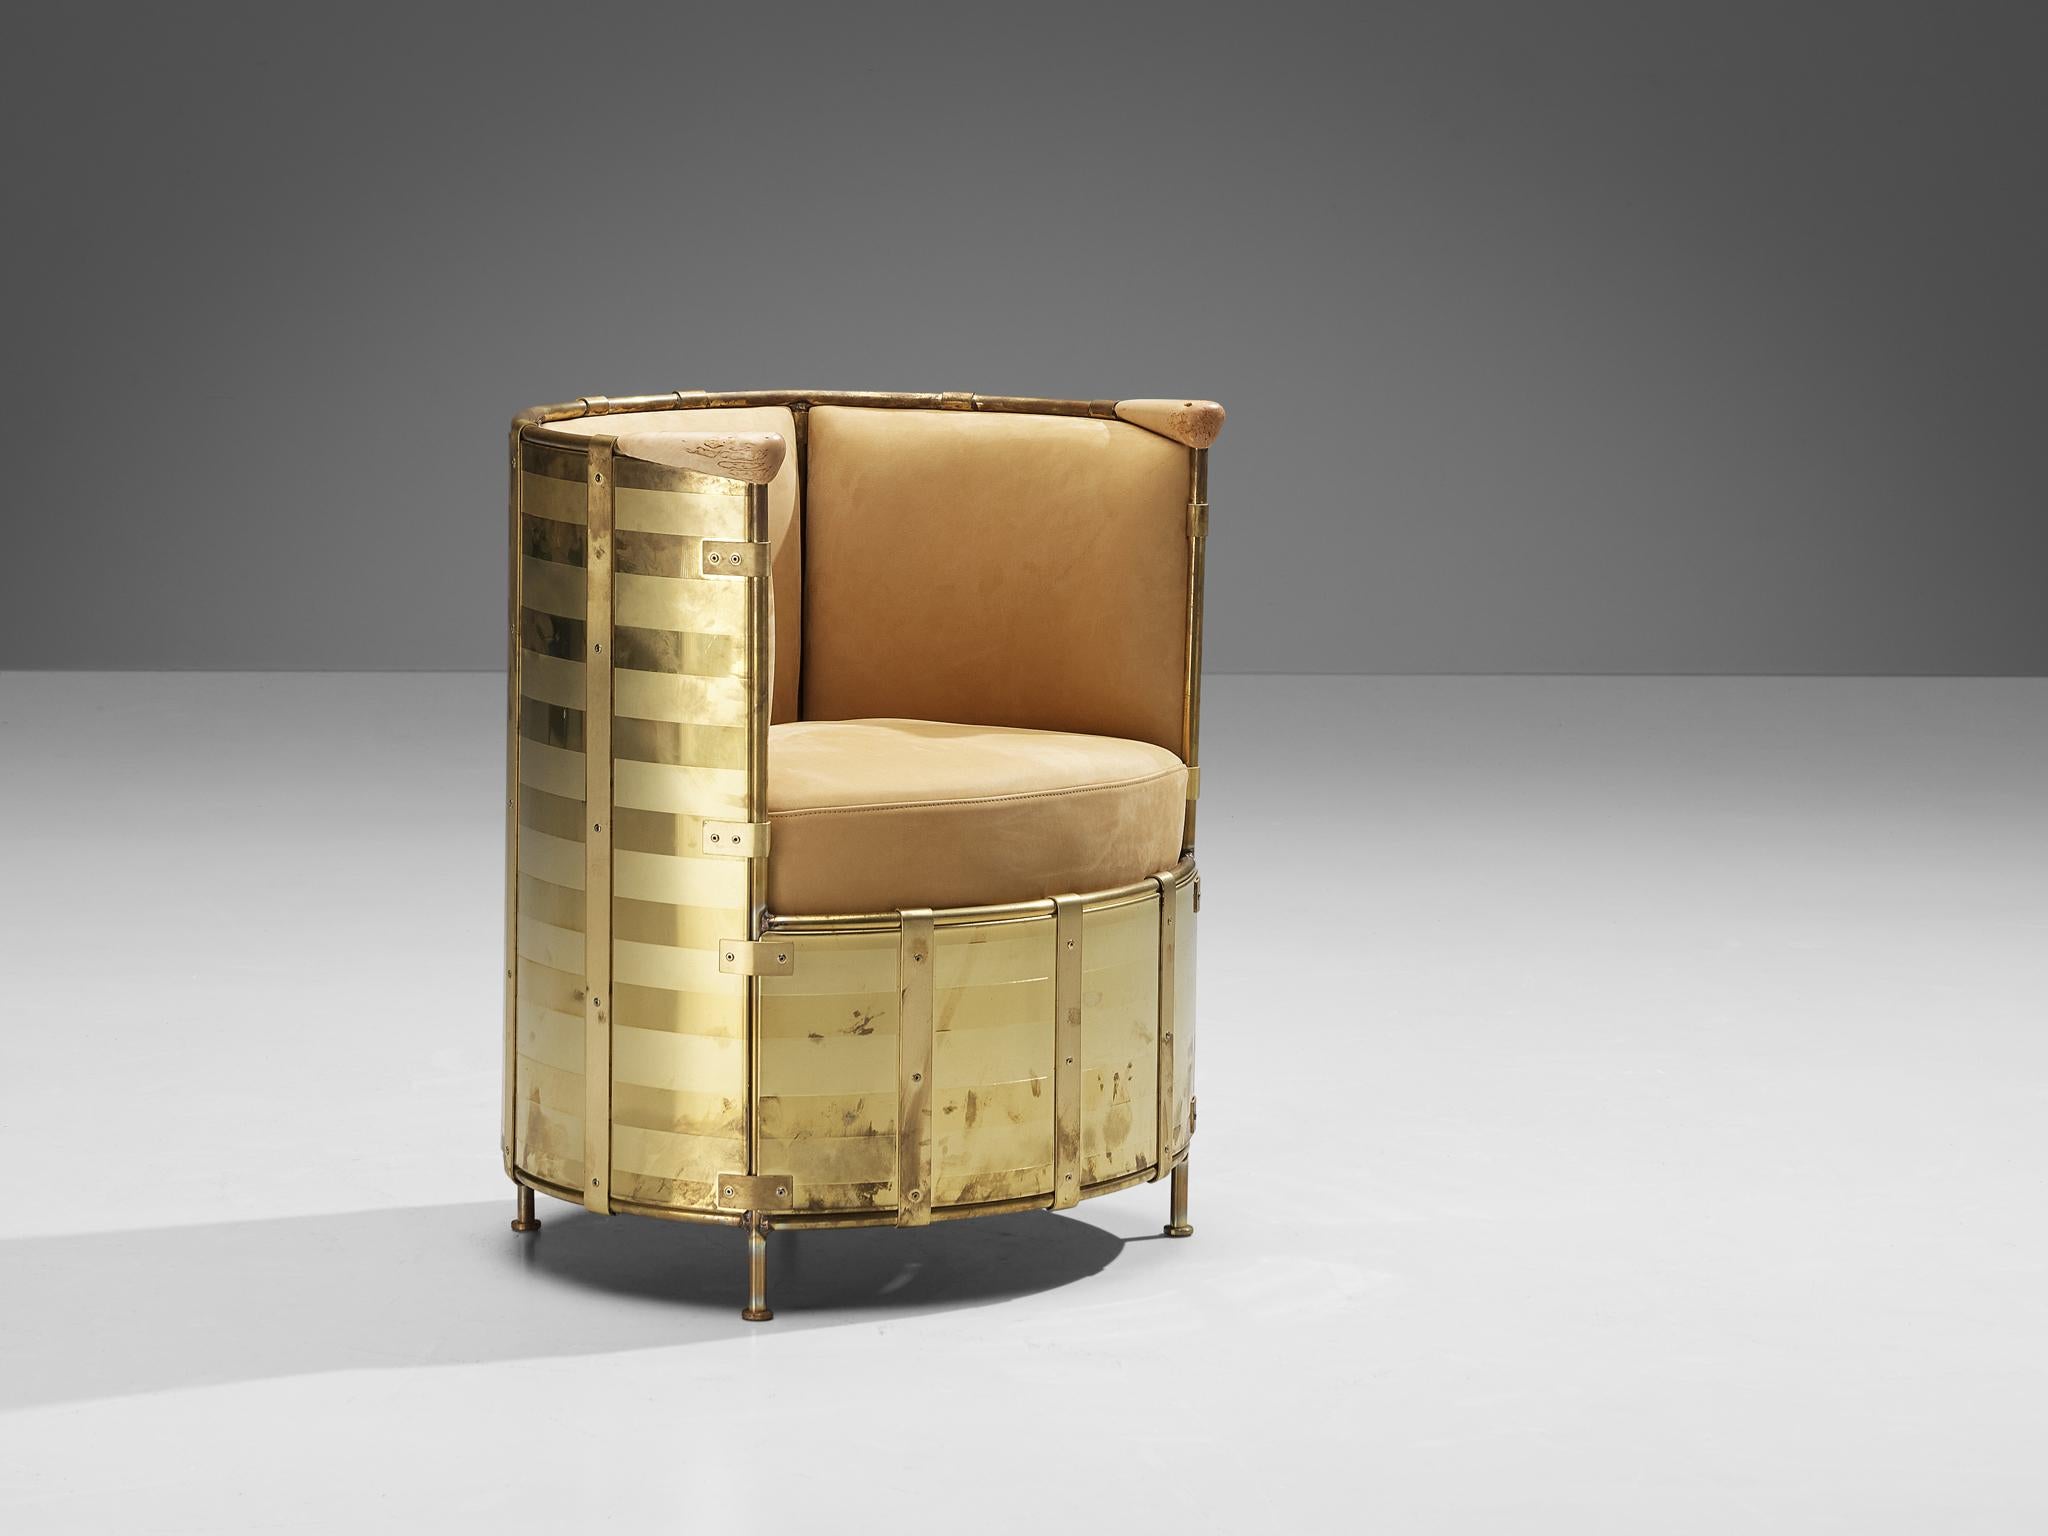 Mats Theselius for Källemo AB, lounge chair 'El Dorado’, limited edition, brass, nubuck leather, maple, Sweden, 2002

This distinct 'El Dorado’ lounge chair by Mats Theselius was designed in 2002 for the 11th anniversary of the earlier edition